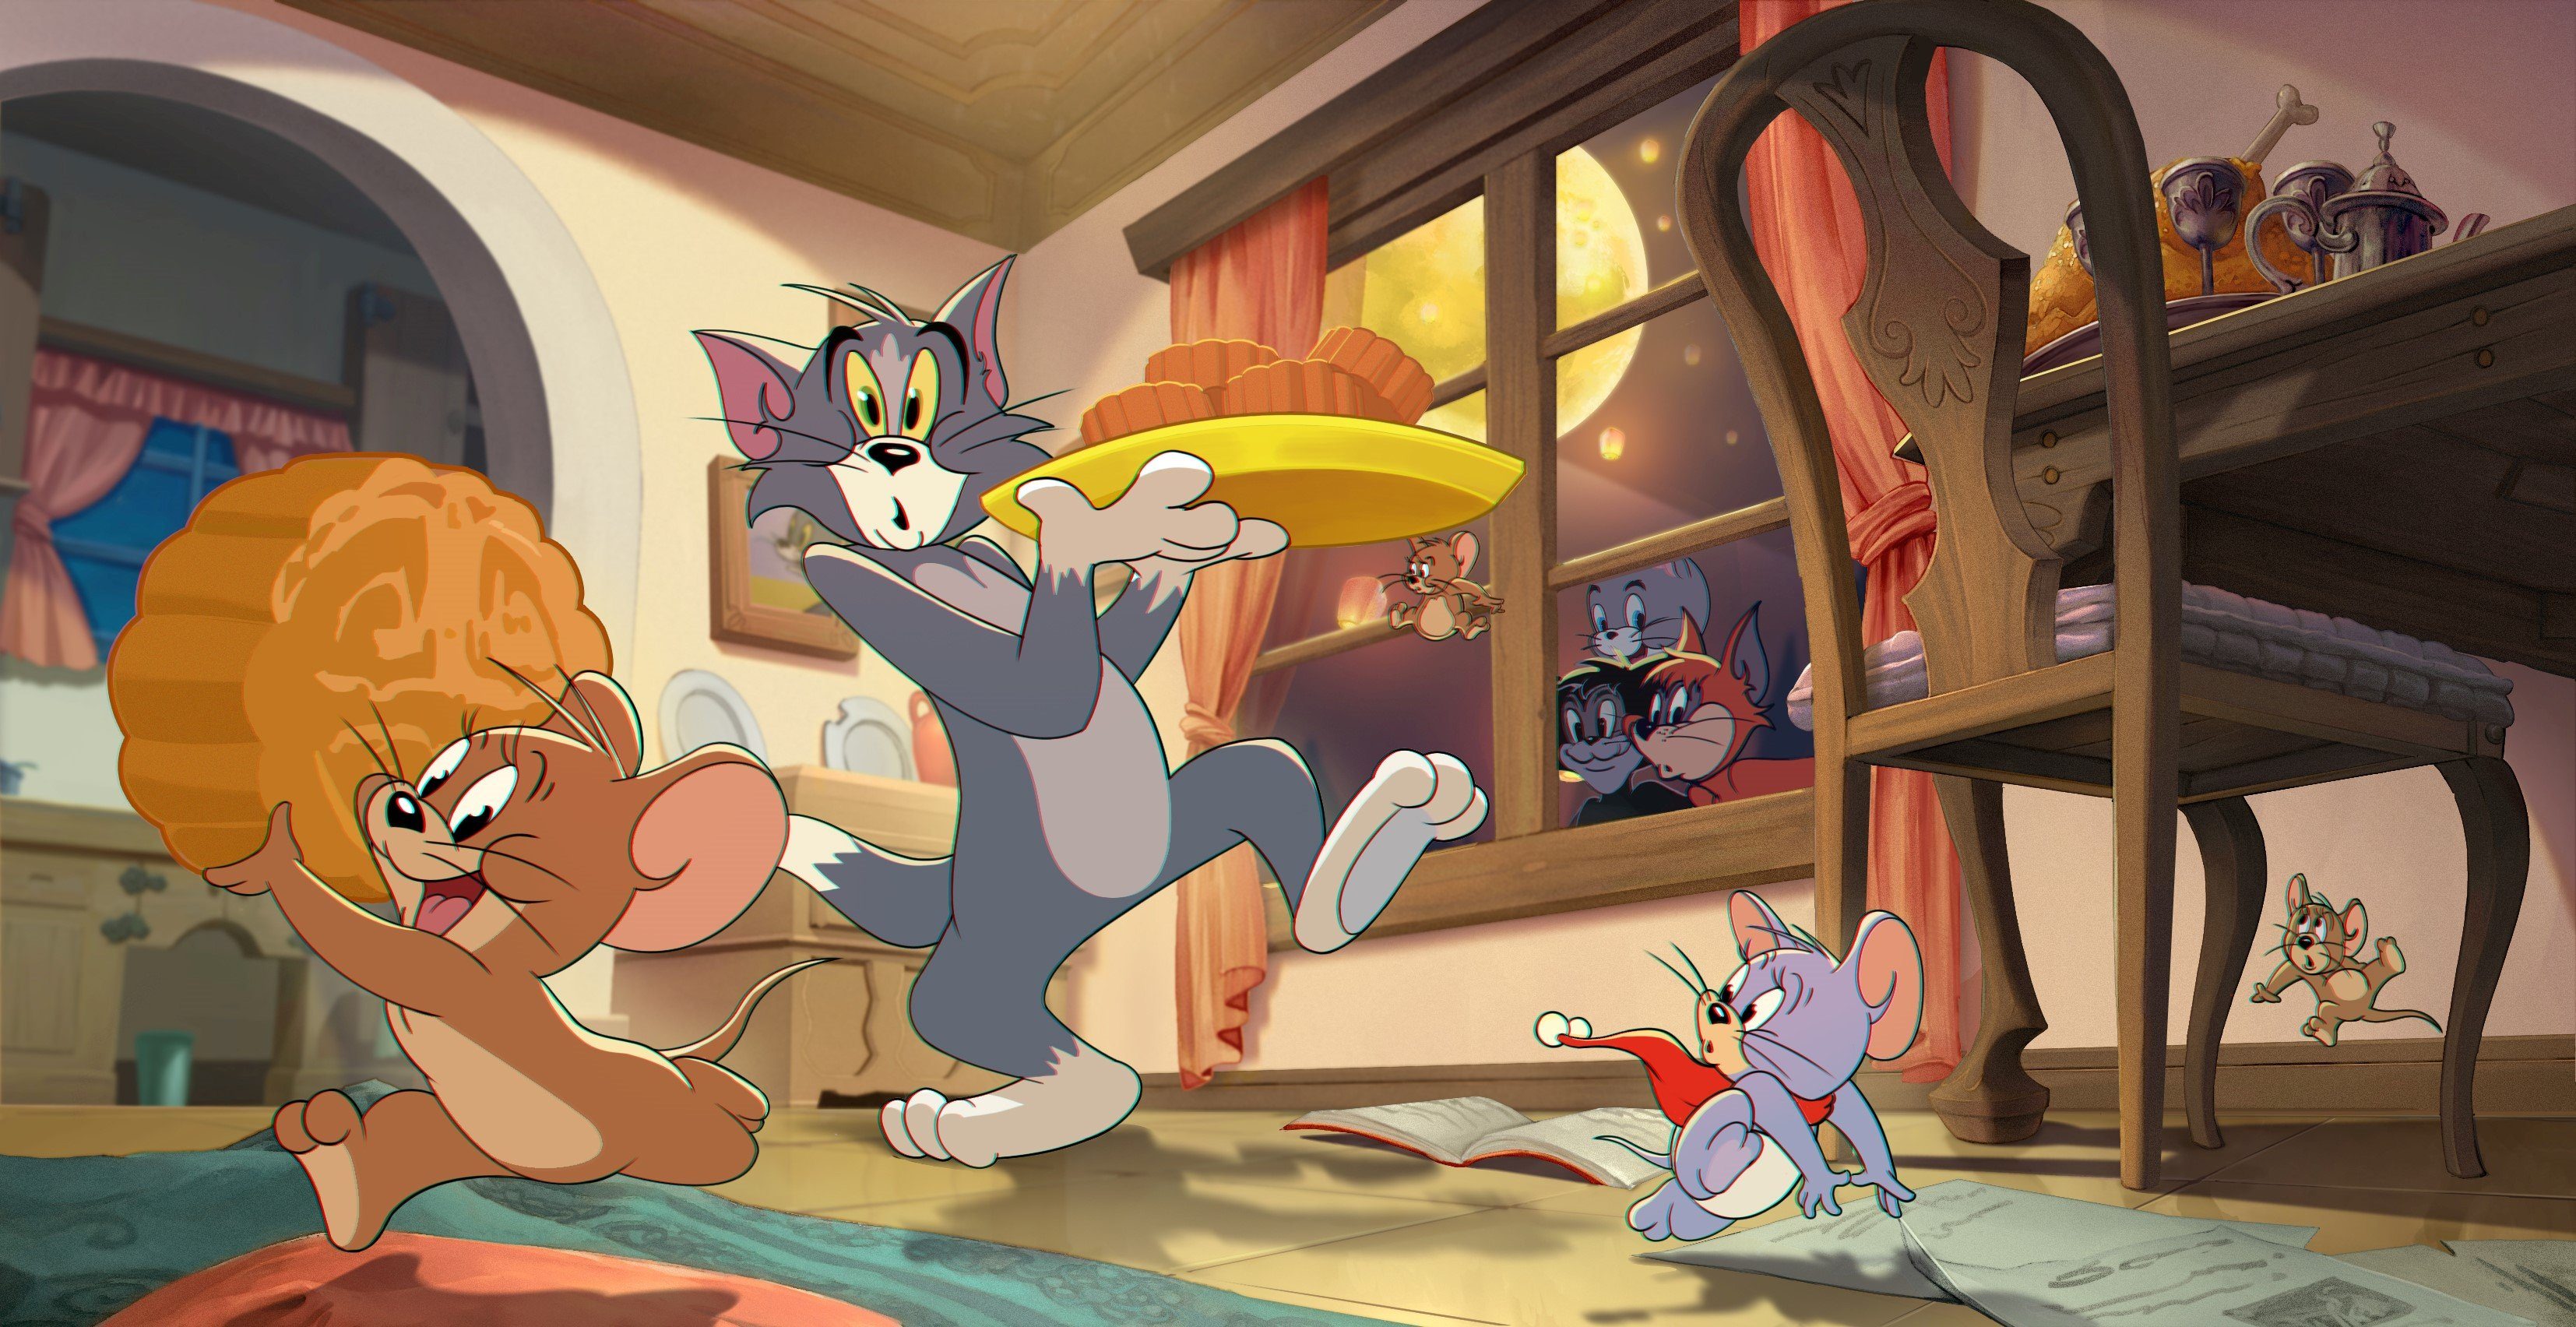 Tom and Jerry Chase. Игра Tom and Jerry Chase. Tom and Jerry Chase Джерри. Шоу Тома и Джерри 2021.